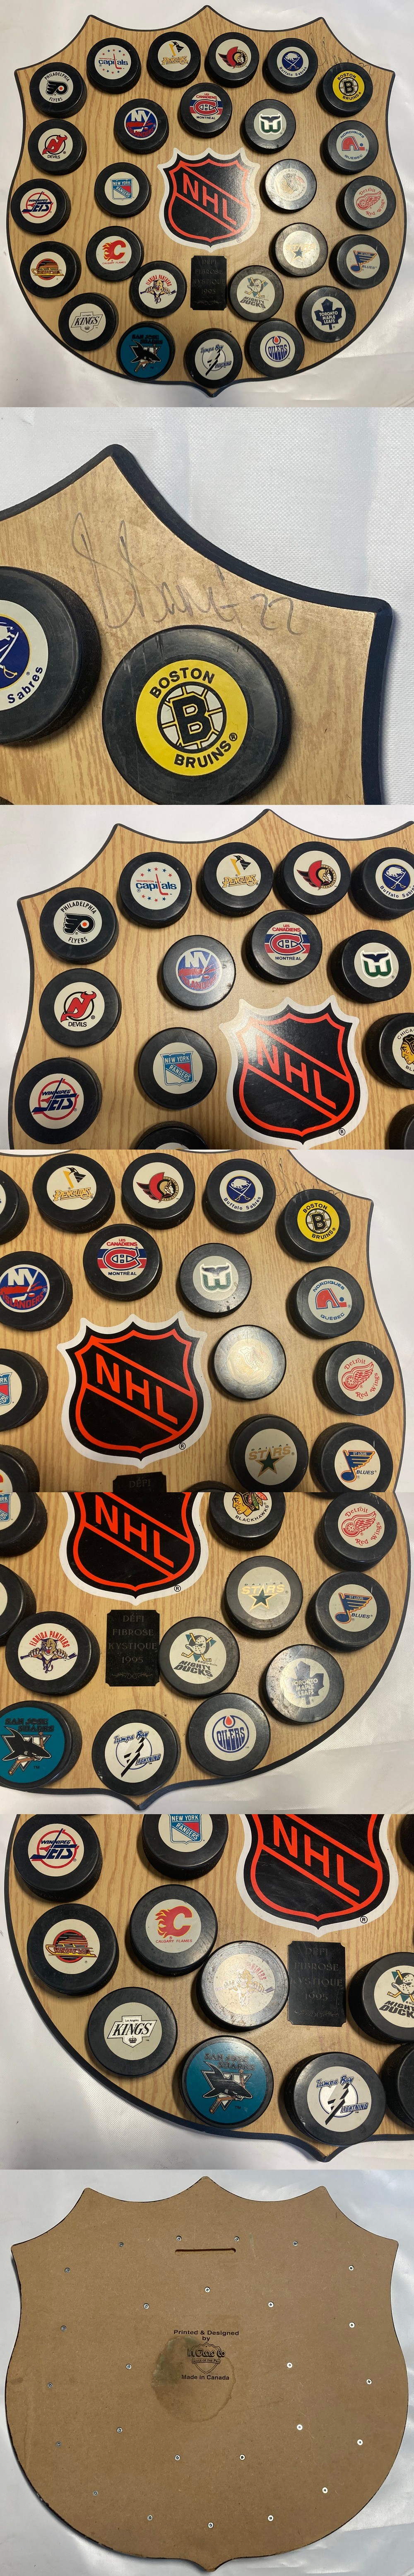 1995 NHL PUCKS DISPLAY 26 AUTOGRAPHED BY P. STASTNY photo